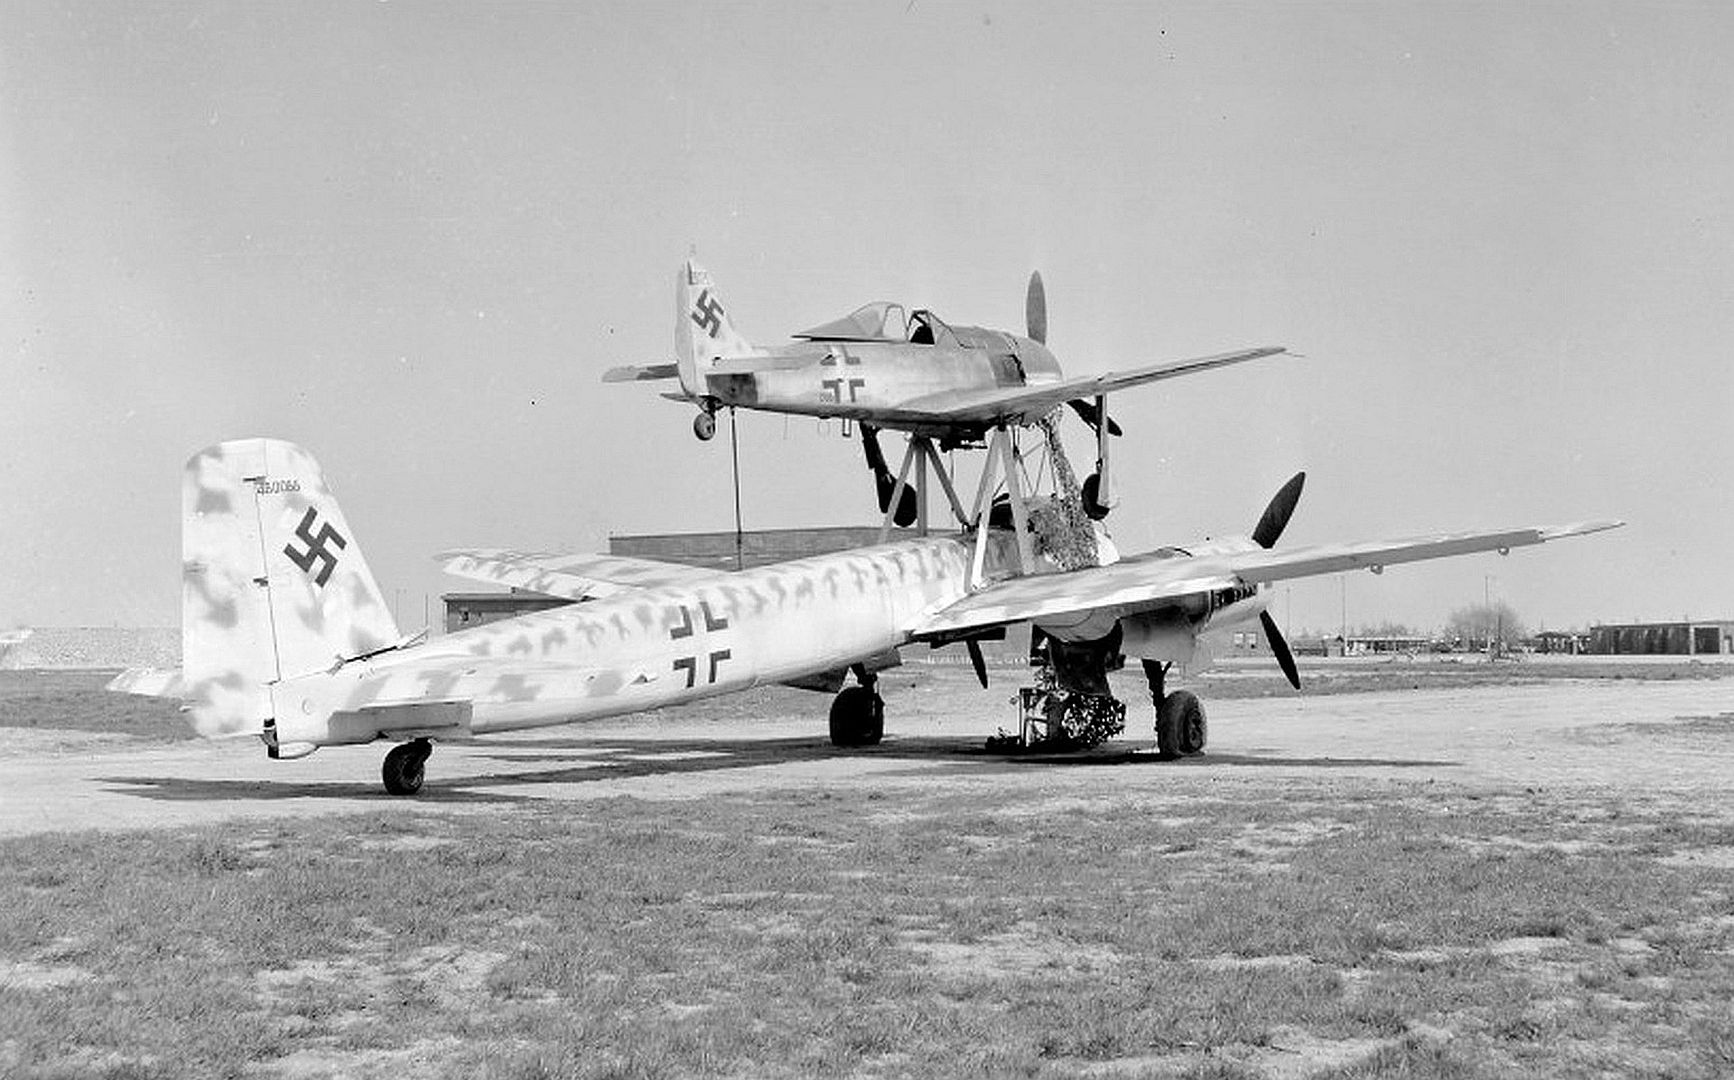 Mistel Ju 88 With Fw 190 Mounted On Back US Army Photo 16 May 1945